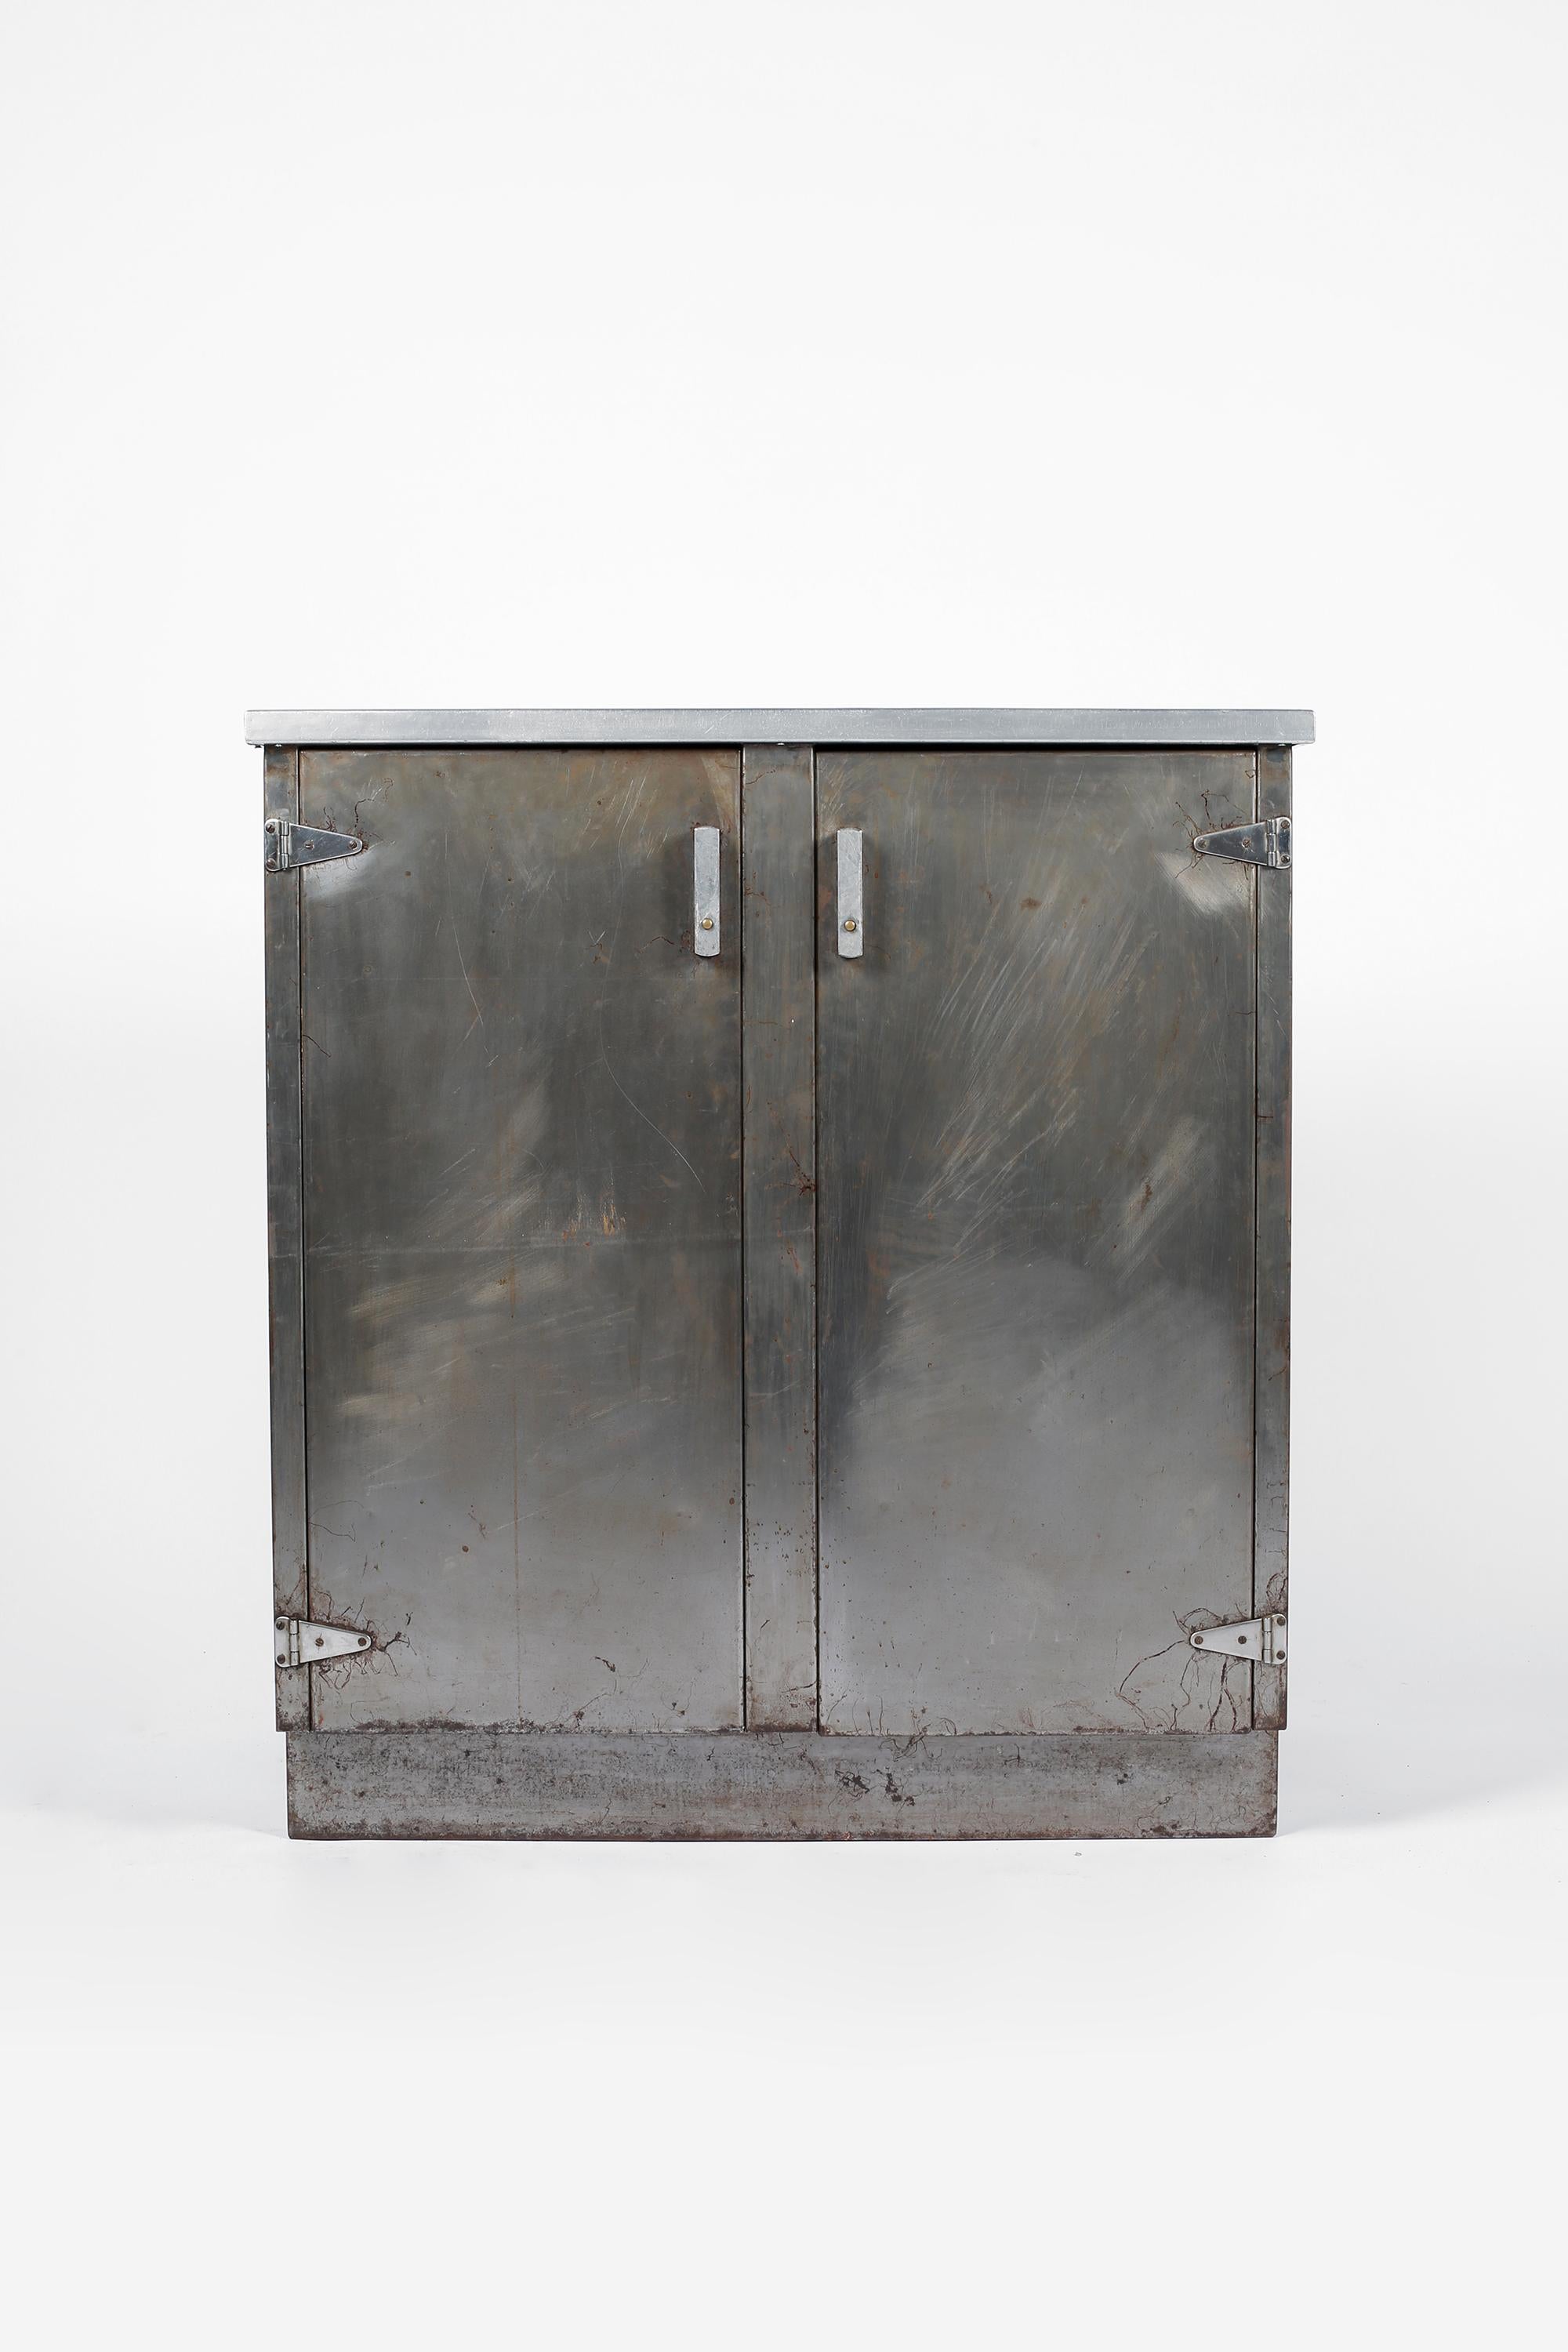 A modernist two door stripped steel cupboard with inset black linoleum top and plinth base. The shaped handles on the cupboard doors open to reveal five shelved compartments and two drawers within. English, c. 1940s.